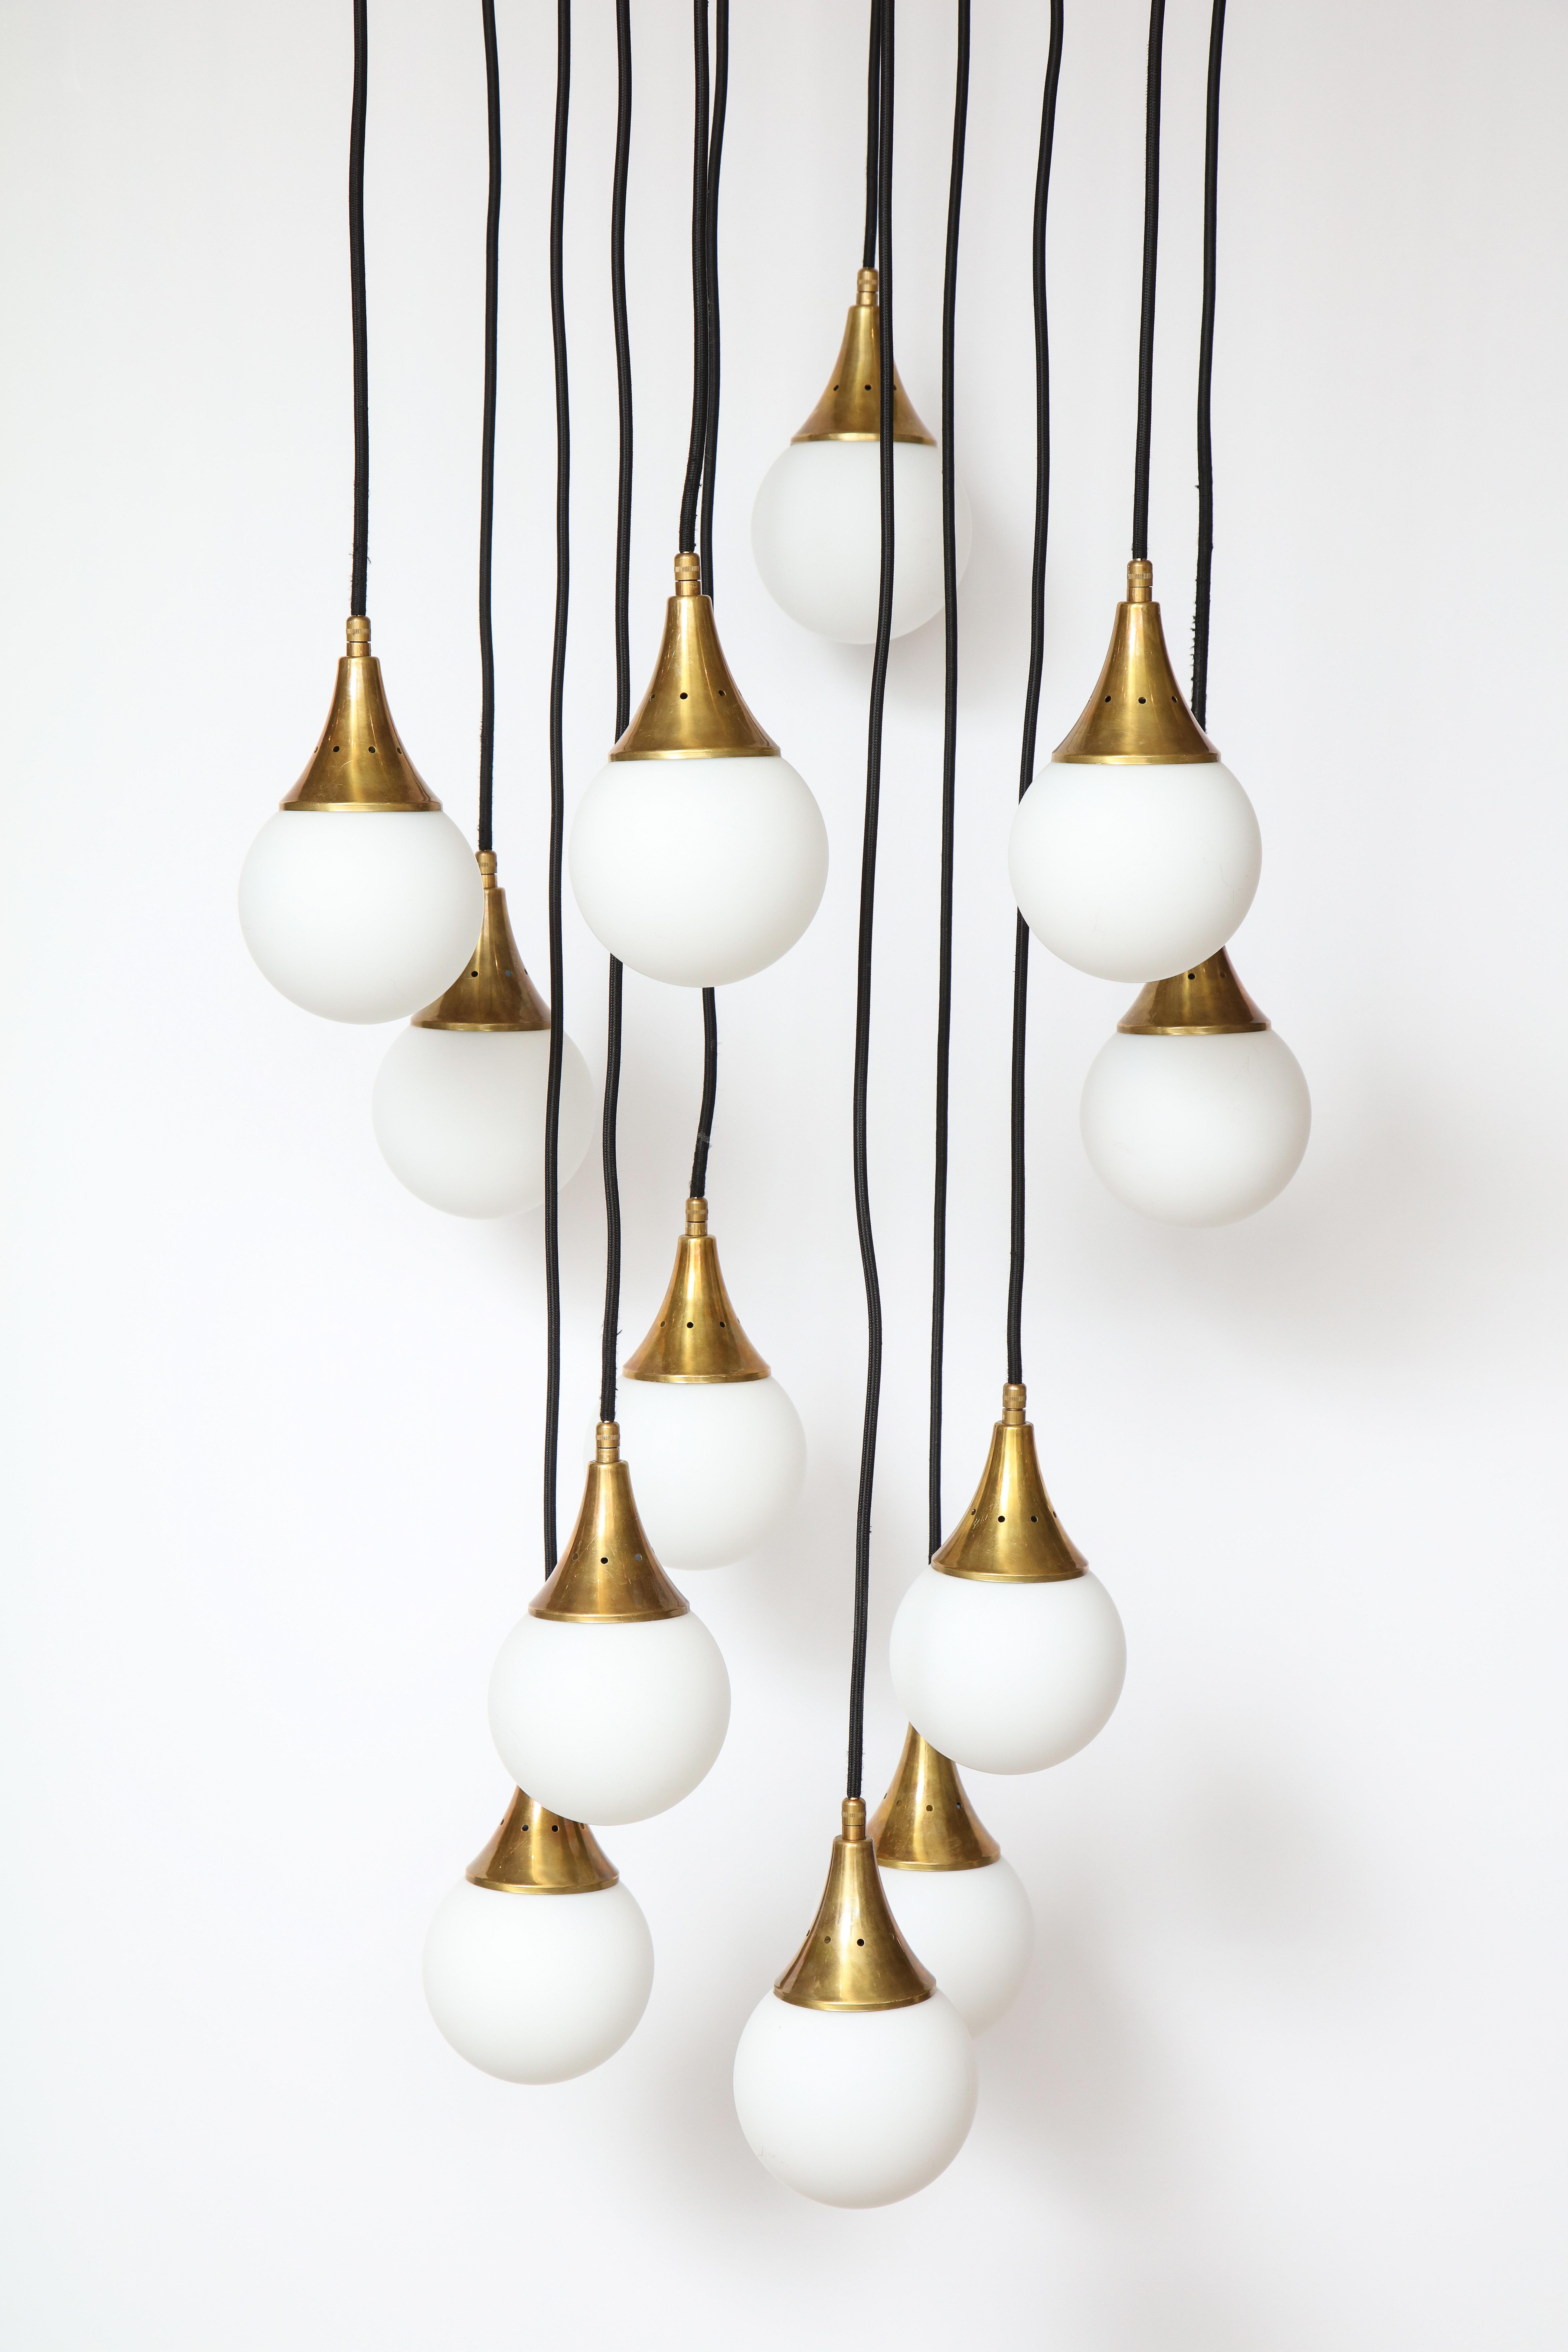 Stilnovo cascading chandelier with twelve opaline glass ball lights supported by brass canopies and suspended by adjustable black fabric wiring. The glass lighting can be adjusted via the fabric wiring to various height levels. The whole supported